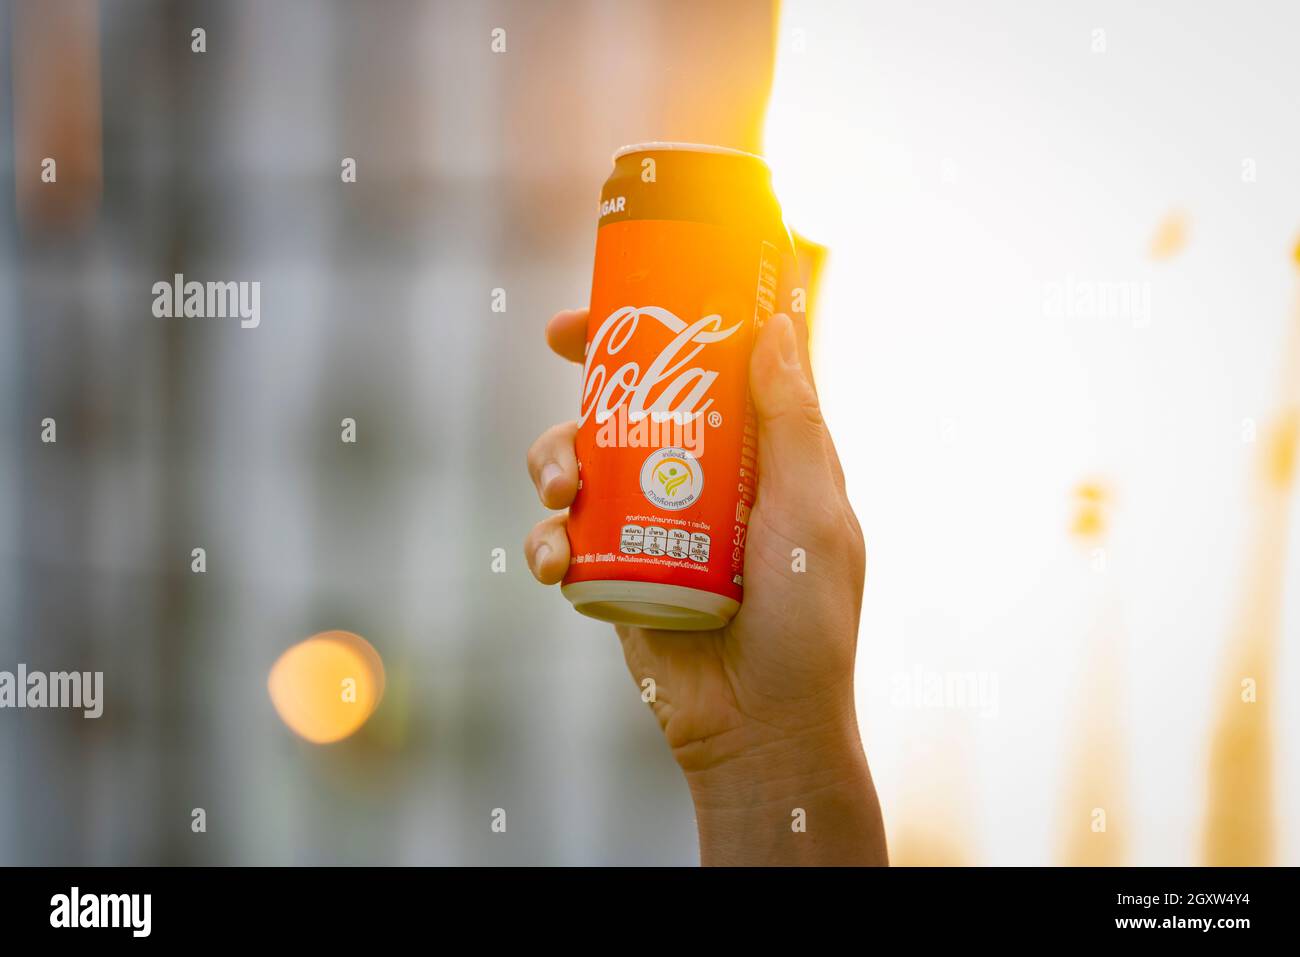 https://c8.alamy.com/comp/2GXW4Y4/coca-cola-drink-in-hand-guy-rising-can-to-sunlight-man-holding-and-drink-coke-can-with-happy-face-at-sunset-bangkokthailand-february-2-2020-2GXW4Y4.jpg